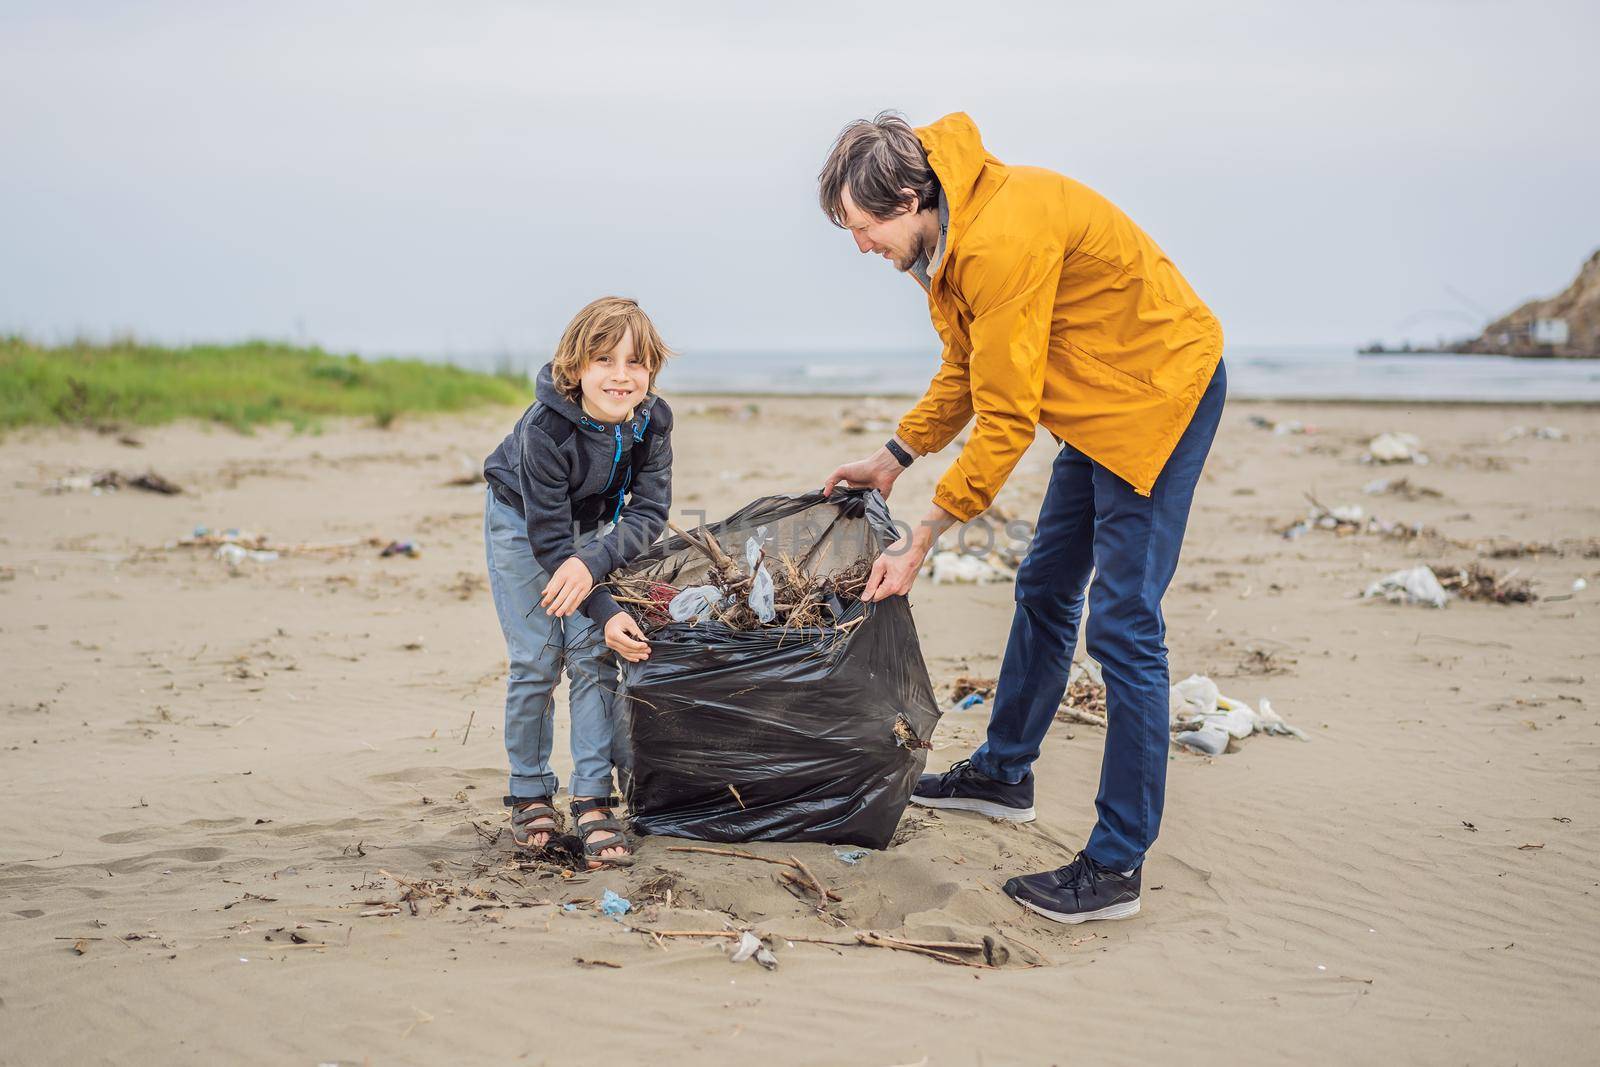 Dad and son in gloves cleaning up the beach pick up plastic bags that pollute sea. Natural education of children. Problem of spilled rubbish trash garbage on the beach sand caused by man-made by galitskaya